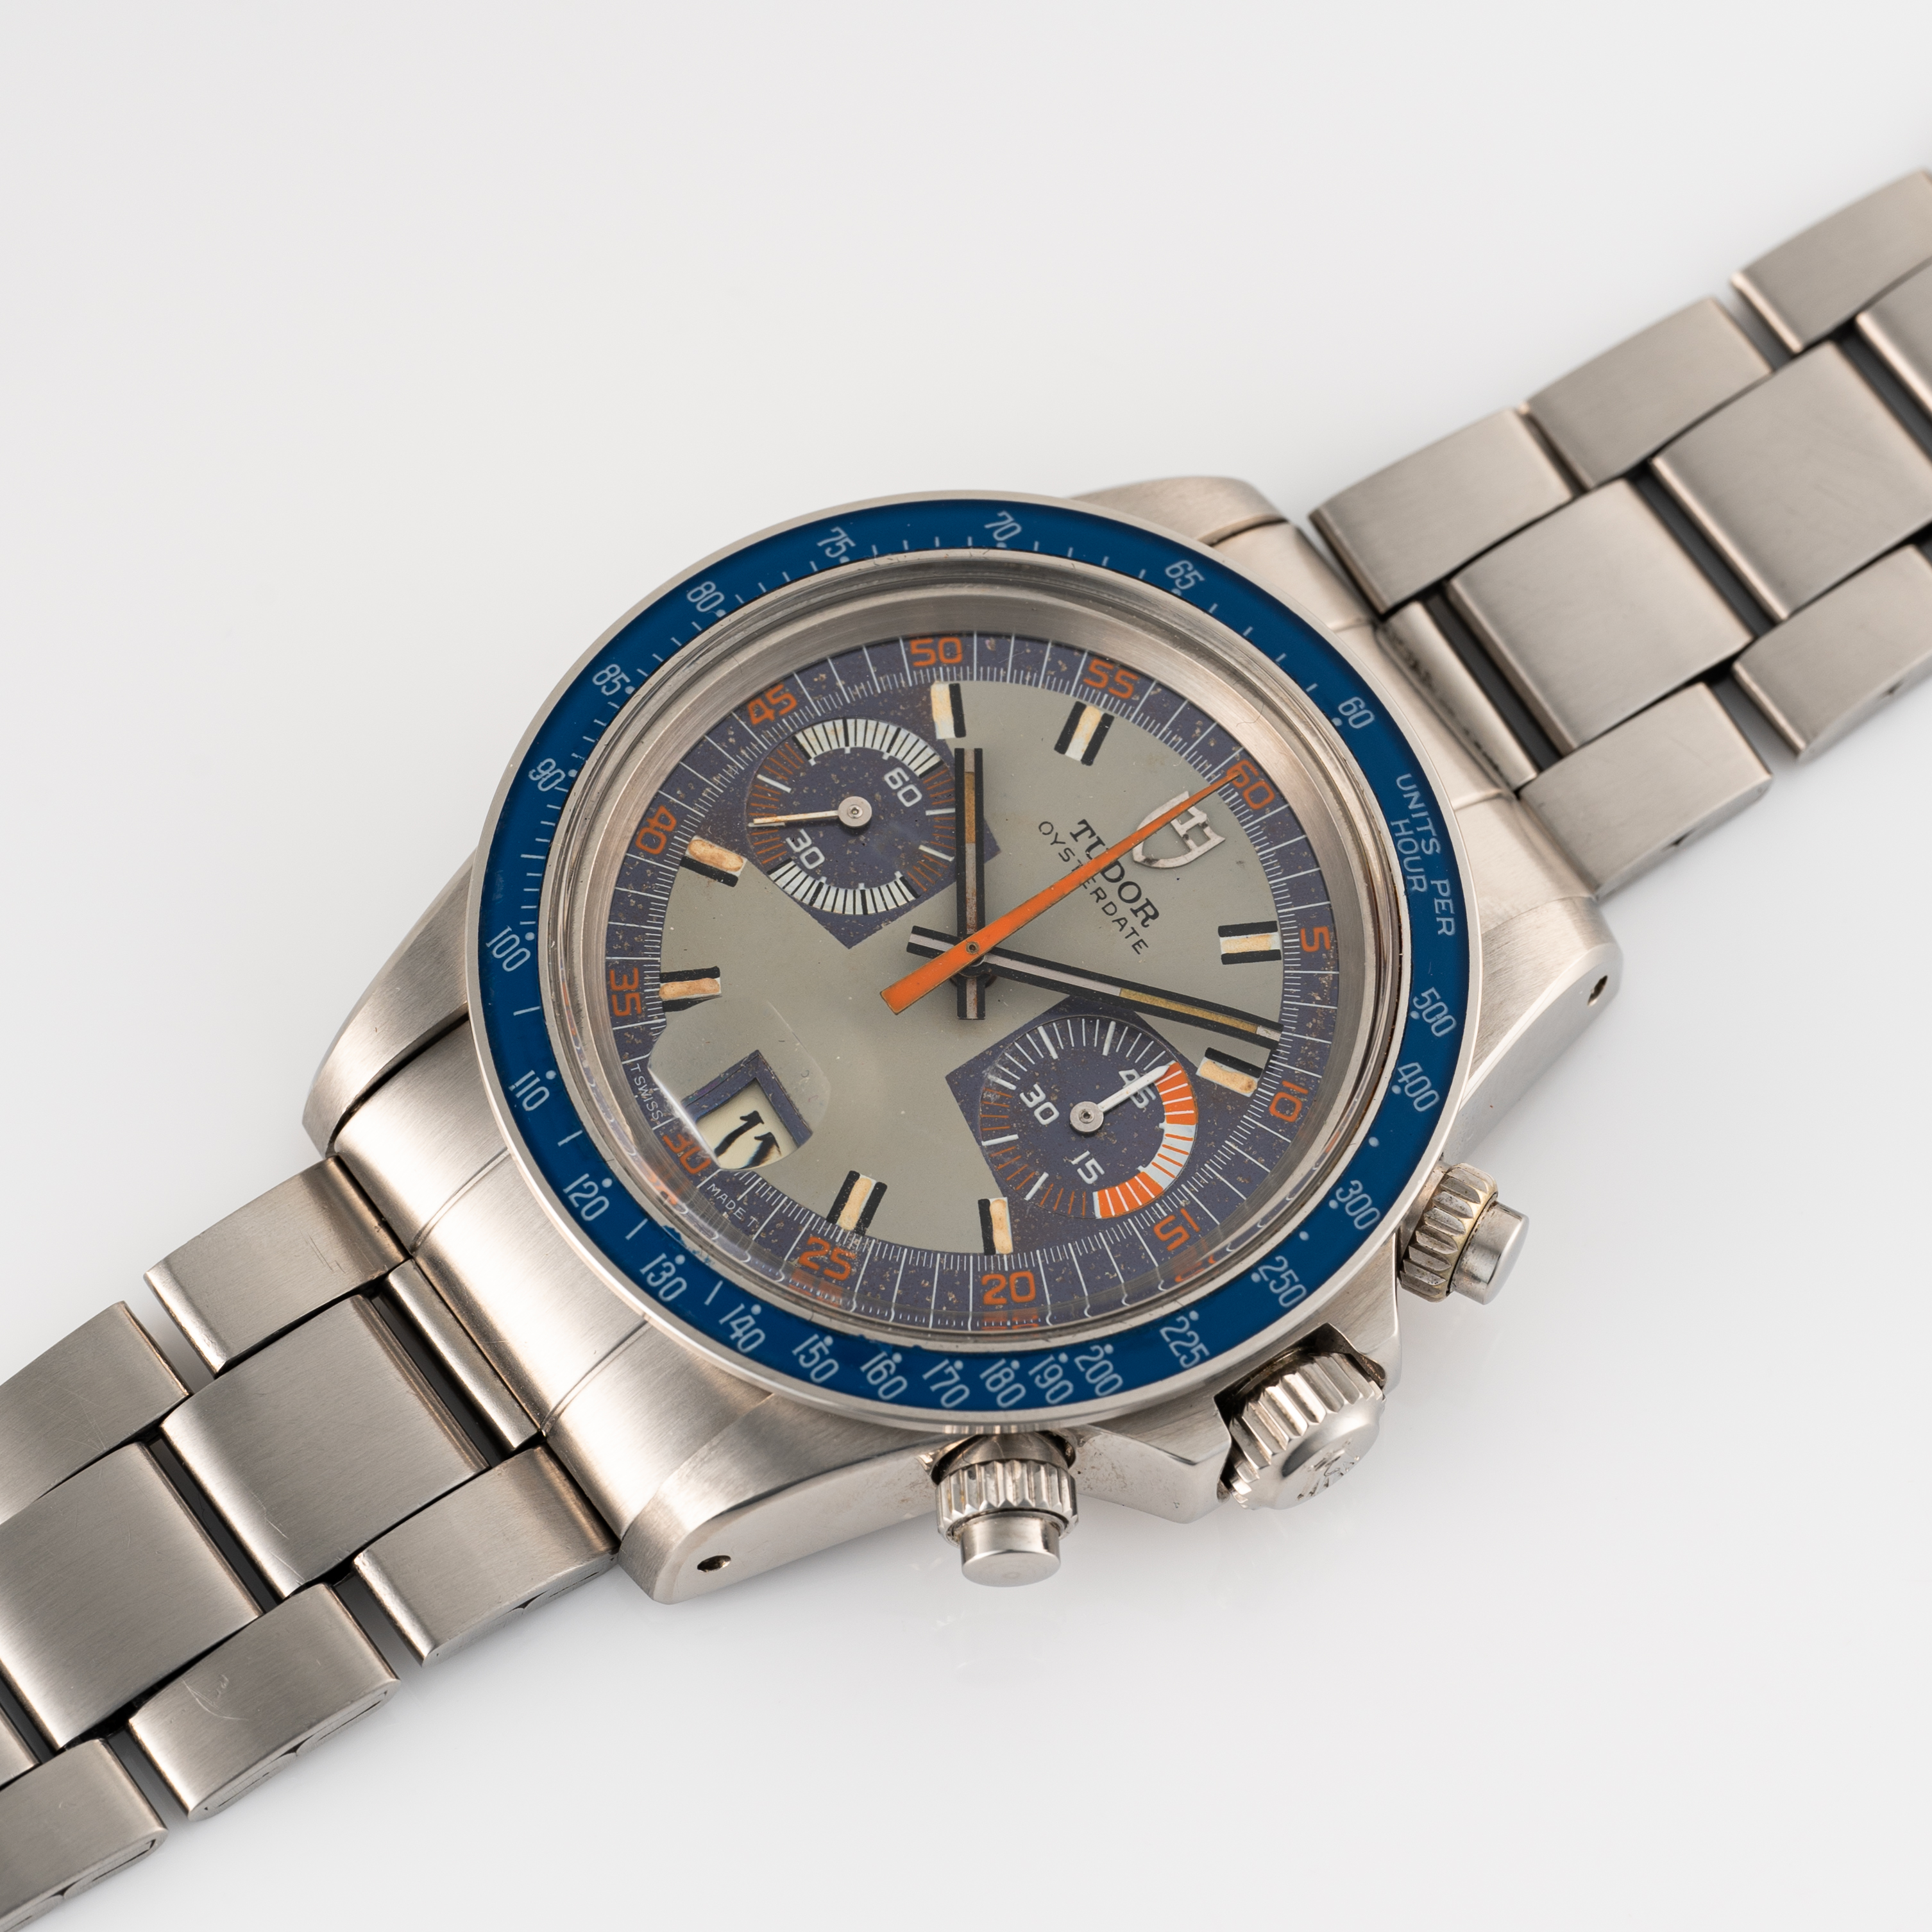 A RARE GENTLEMAN'S SIZE STAINLESS STEEL ROLEX TUDOR OYSTERDATE MONTE CARLO BLUE CHRONOGRAPH BRACELET - Image 4 of 10